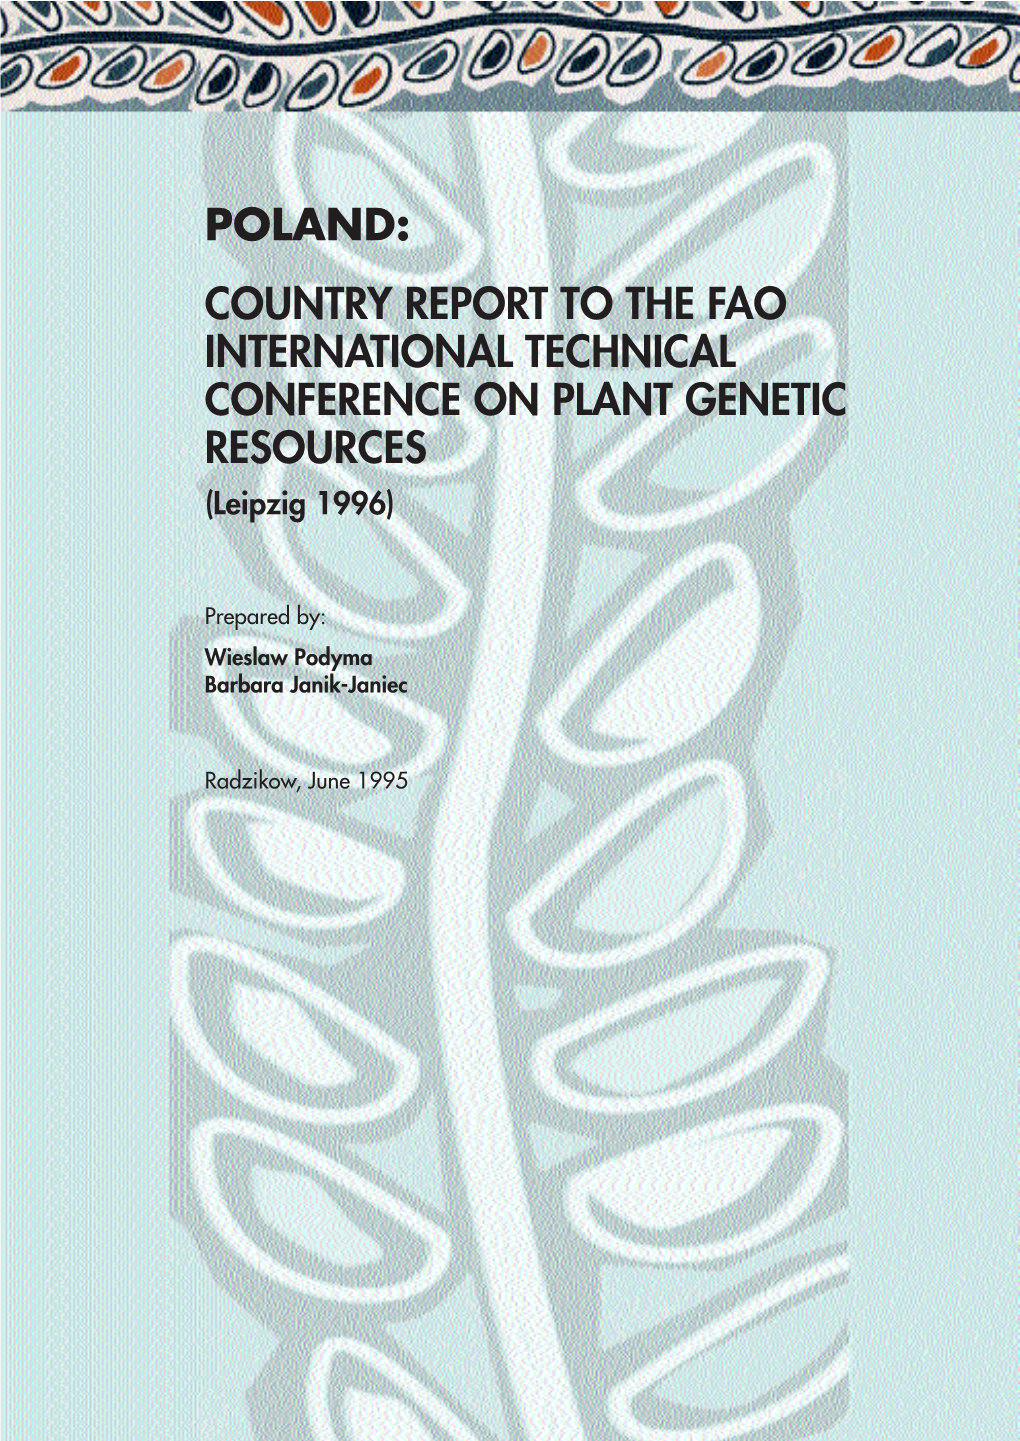 POLAND: COUNTRY REPORT to the FAO INTERNATIONAL TECHNICAL CONFERENCE on PLANT GENETIC RESOURCES (Leipzig 1996)